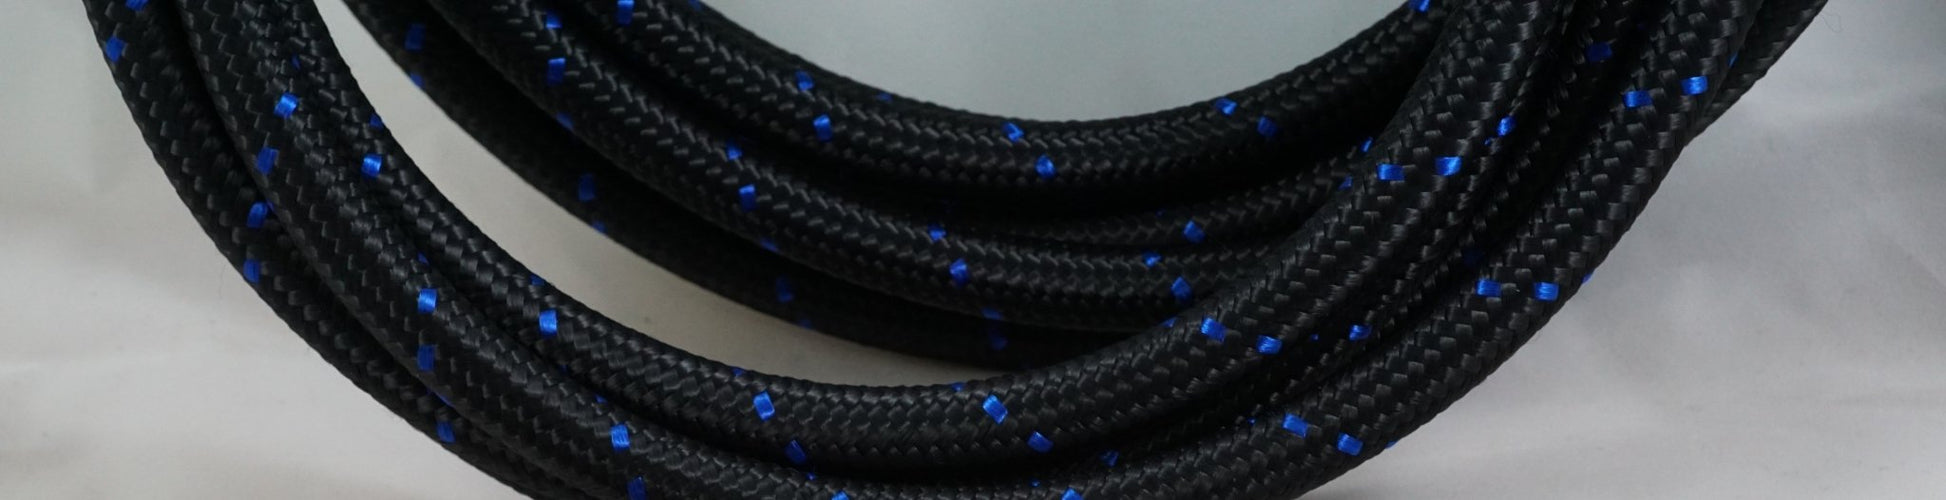 PTFE lined Black Nylon with Blue Check braided hose - AN6, AN8, AN10 - Hot Rod fuel hose by One Guy Garage